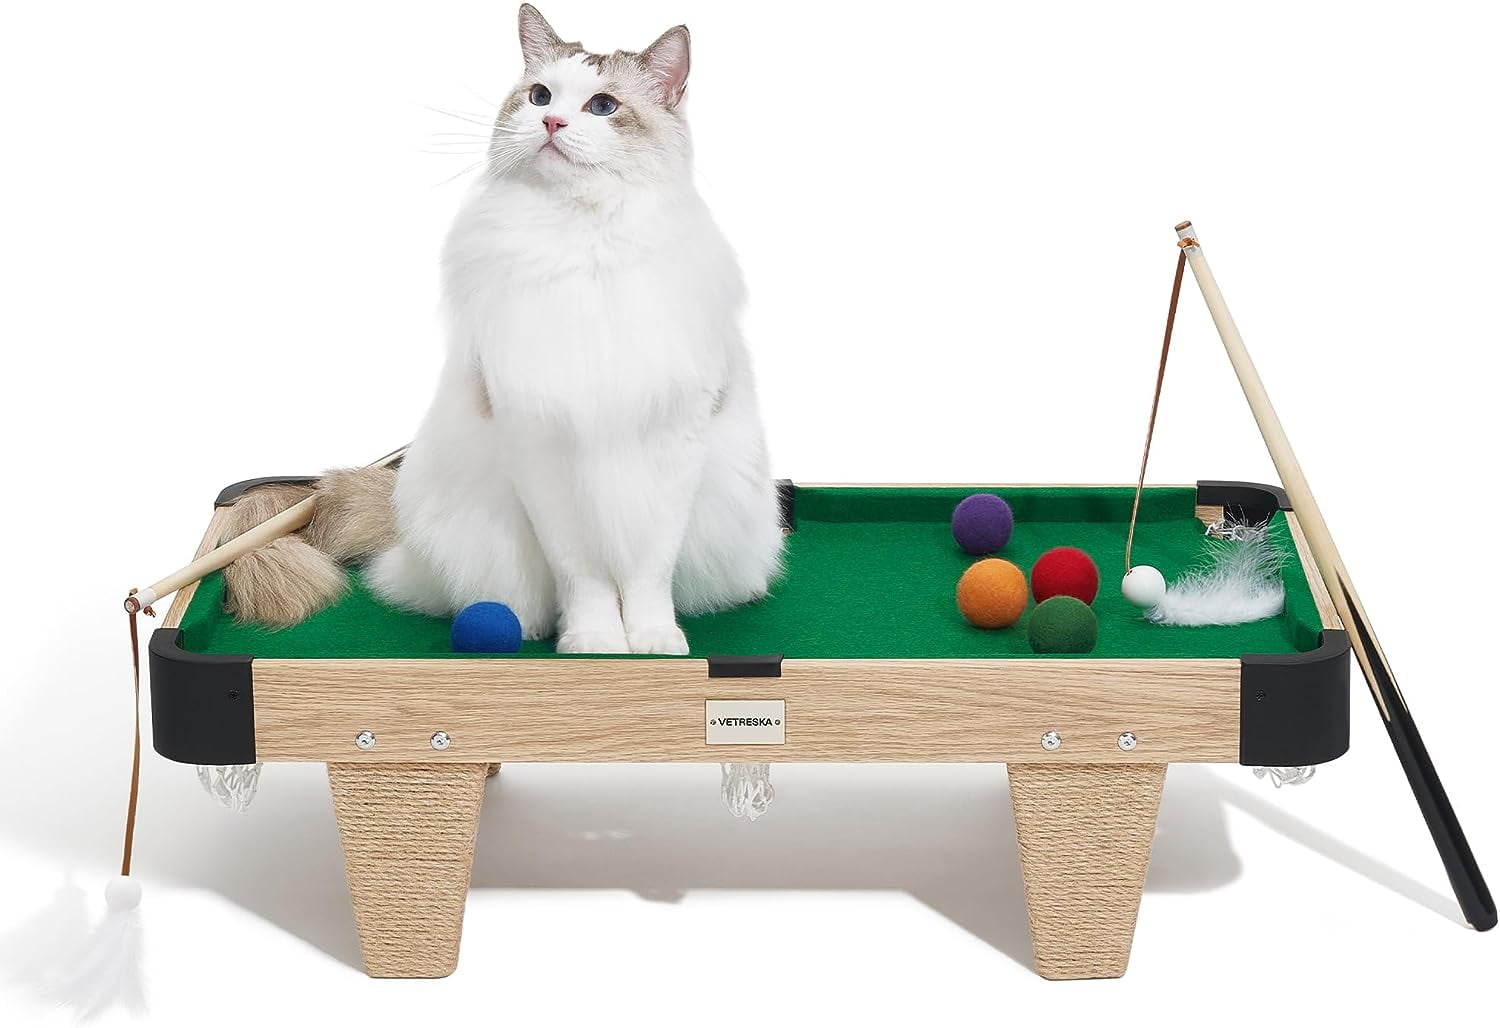 VETRESKA Cat Toys Cat Pool Table Toy Wand Toy with Sisal Rope Scratching Post Activity Center Green